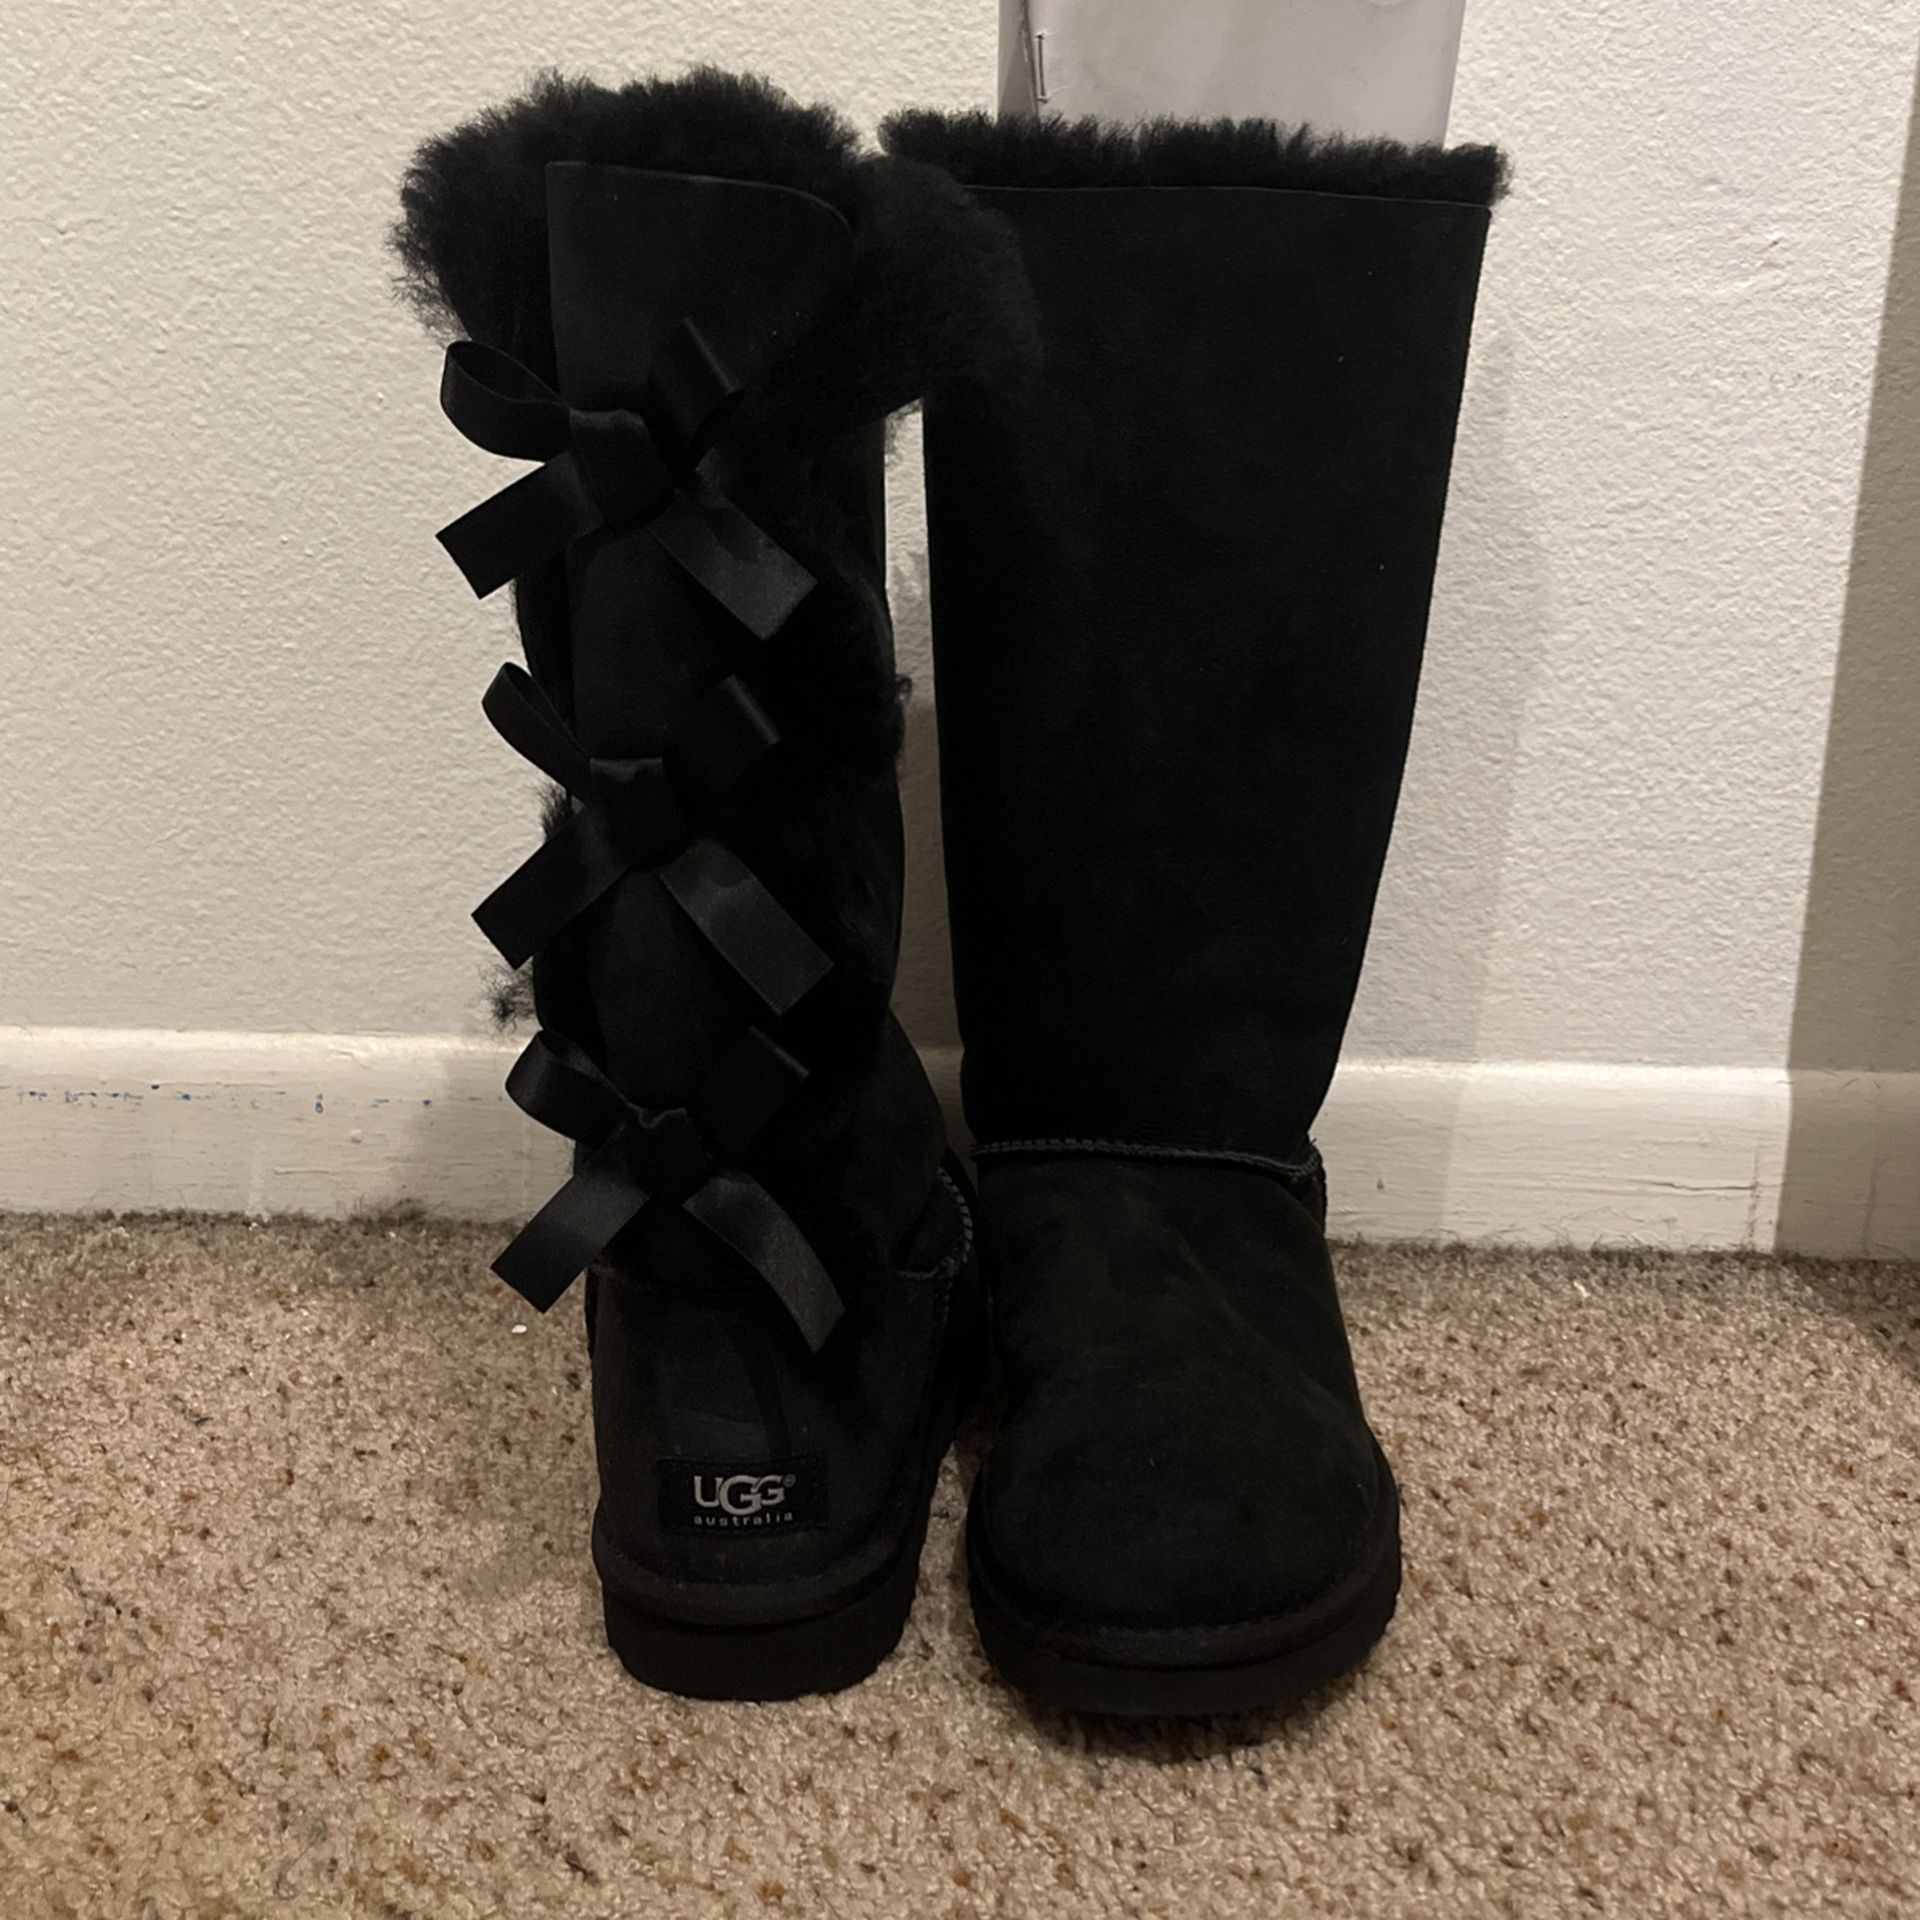 Ugg Boots Size 8.5